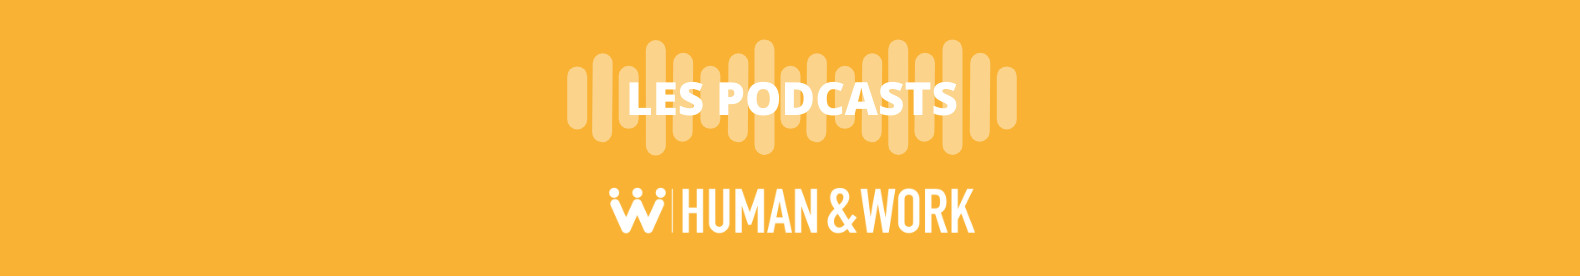 podcasts-hw-1